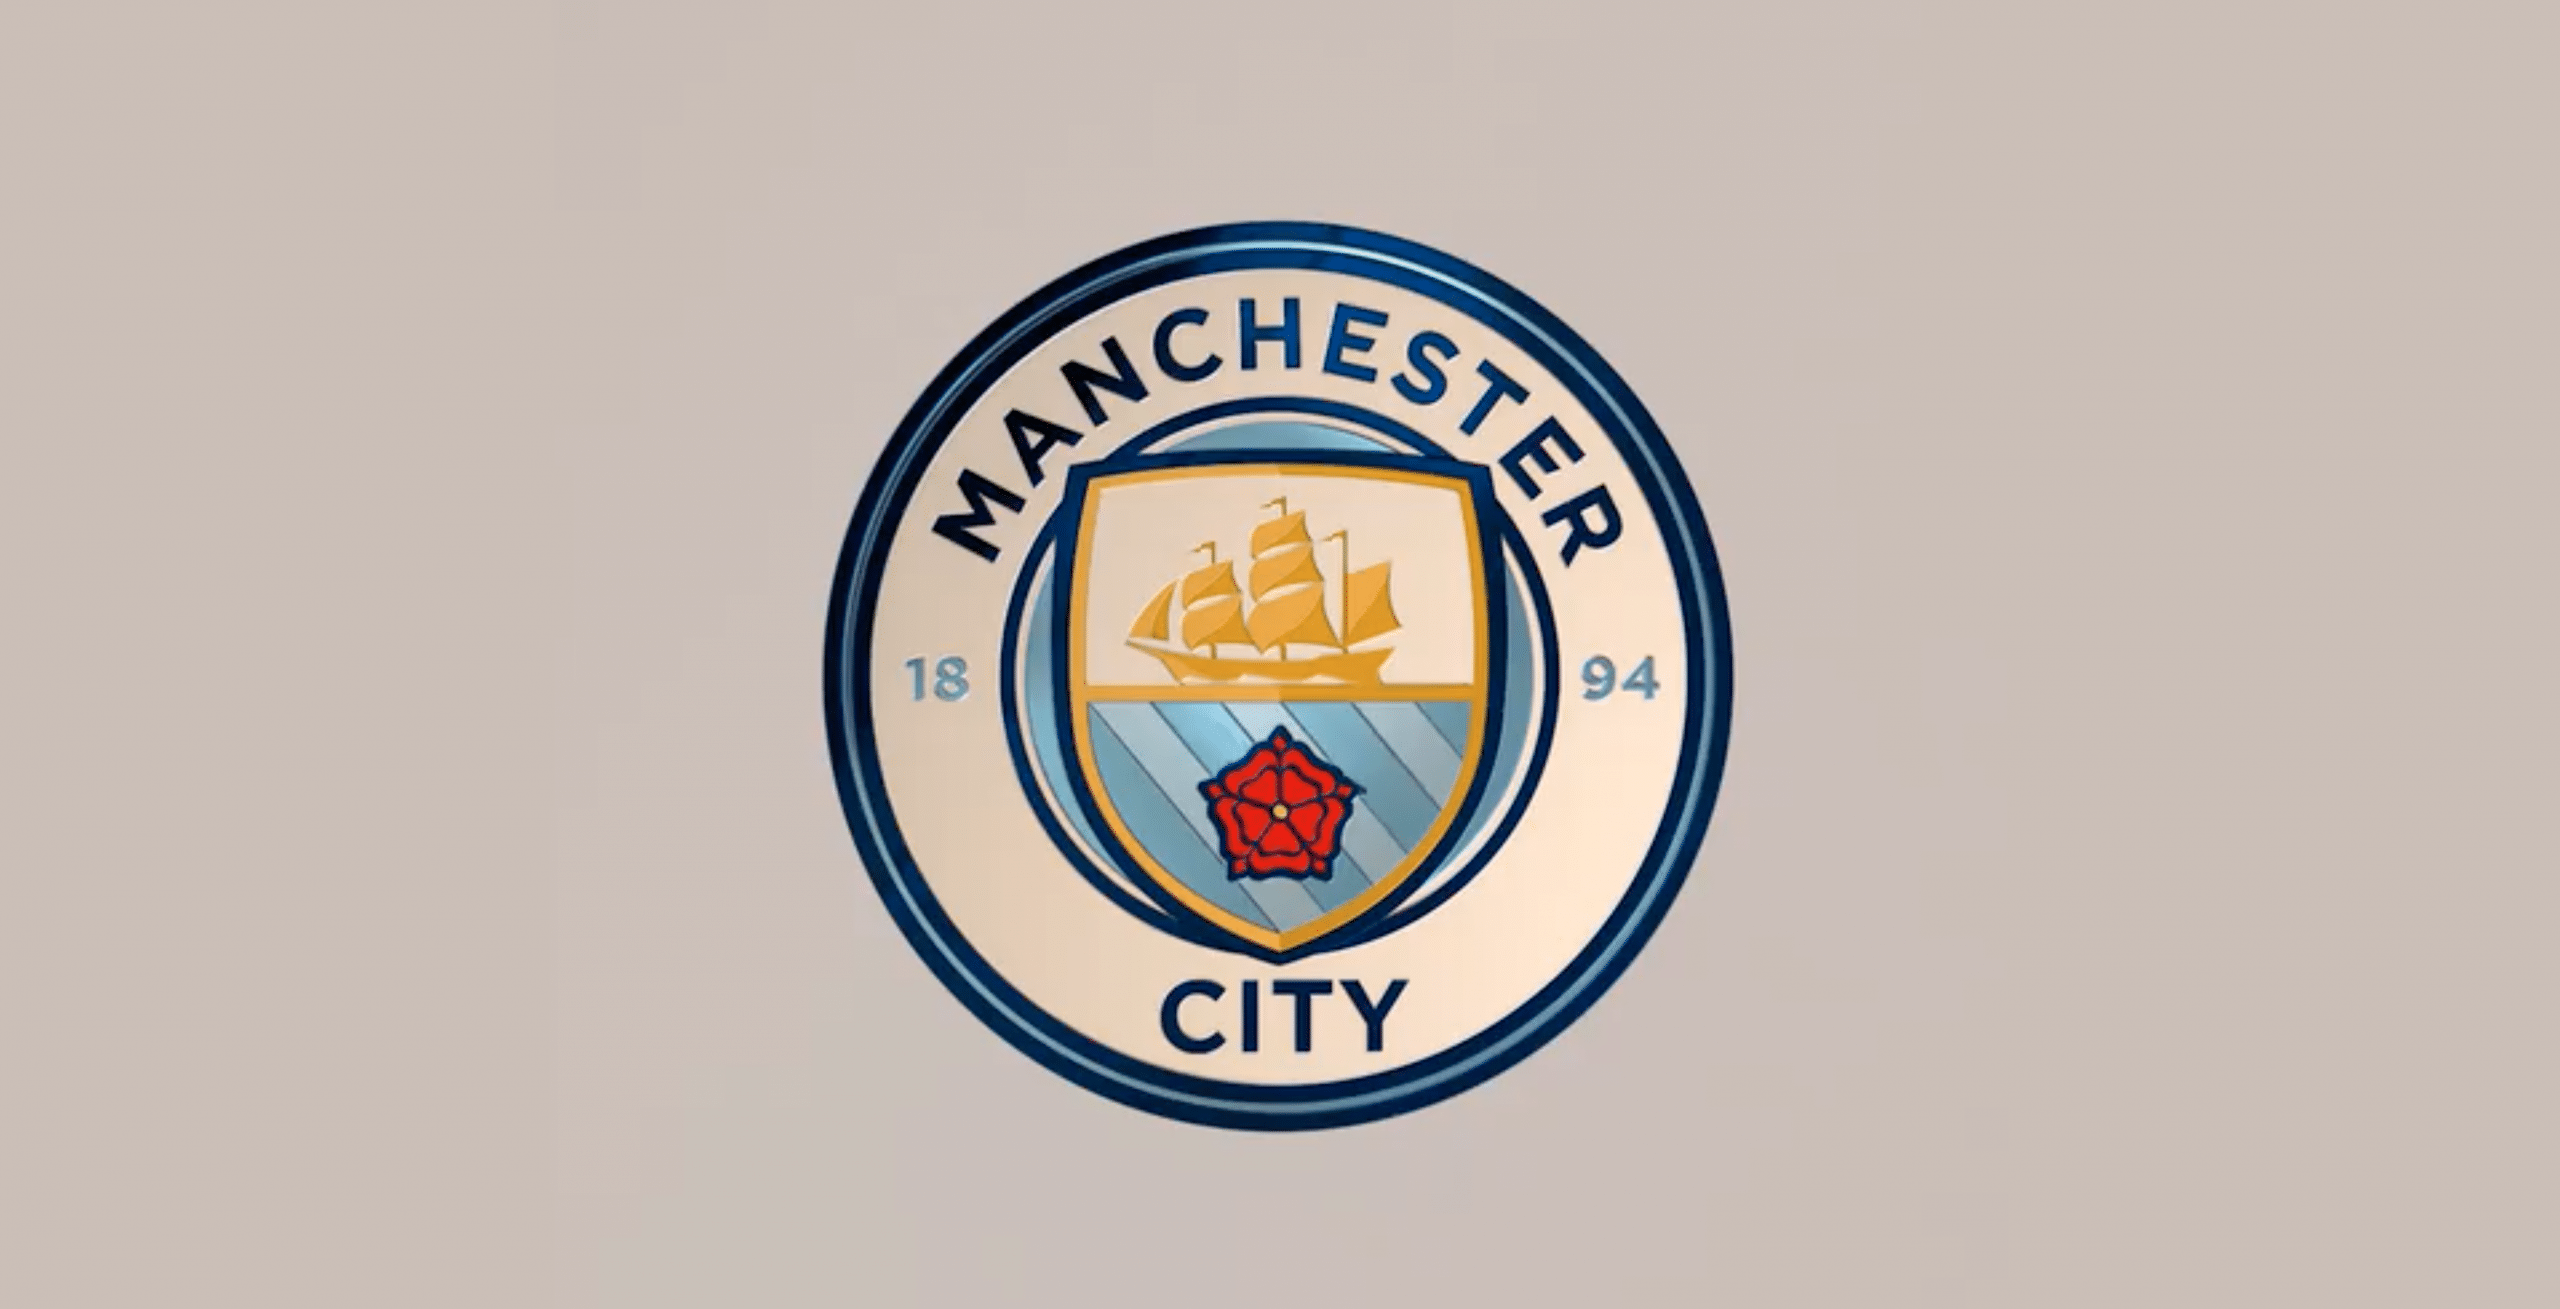 Manchester City's new NFT drop promises to be a big event for the title winners.